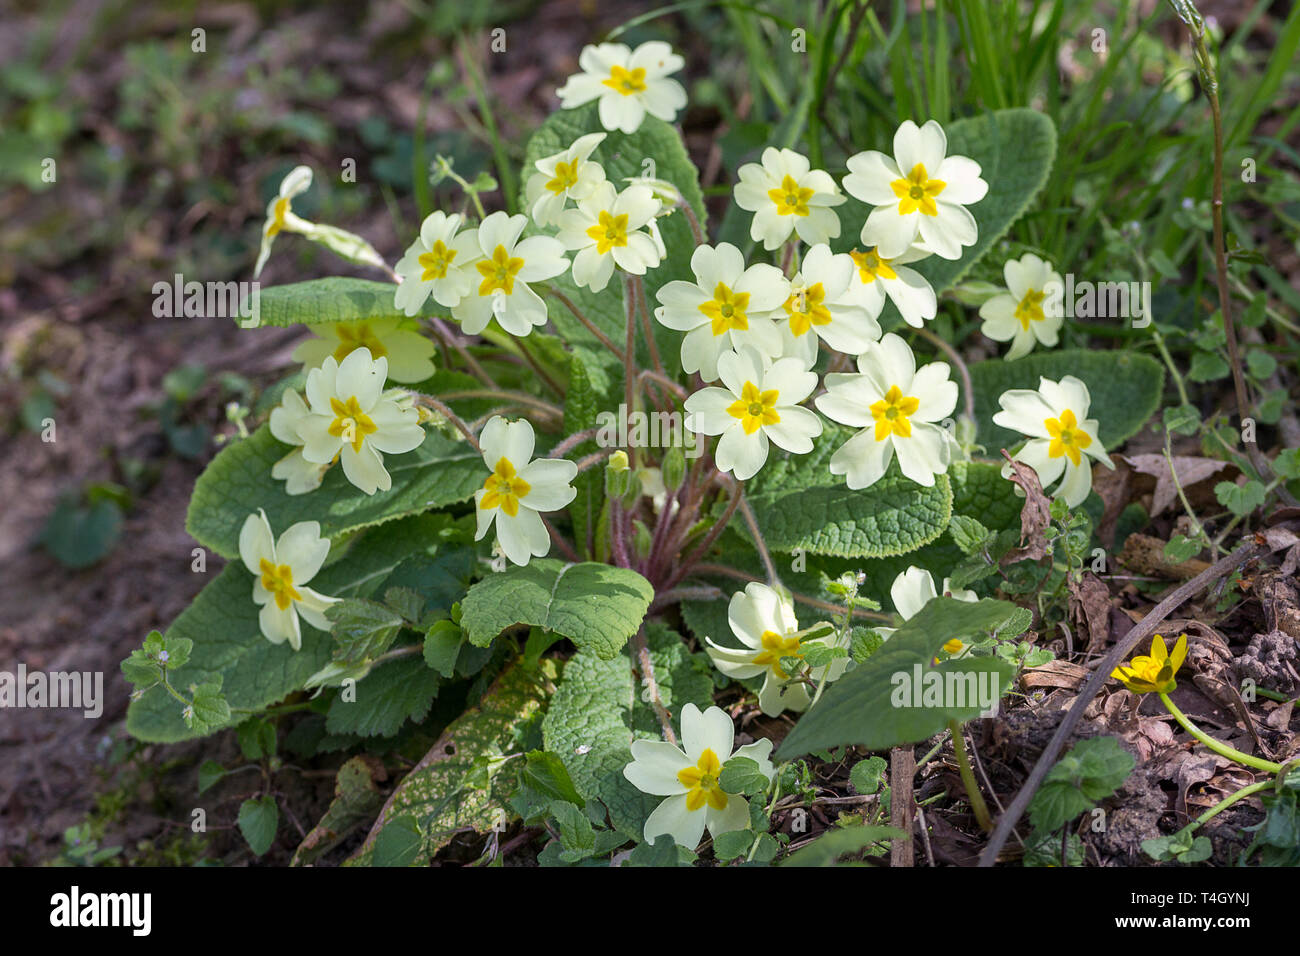 Primrose (Primula vulgaris) clump of spring season wild perennial woodland flowers. Oval tapering leaves pale yellow lemon  petals with yellow centre. Stock Photo